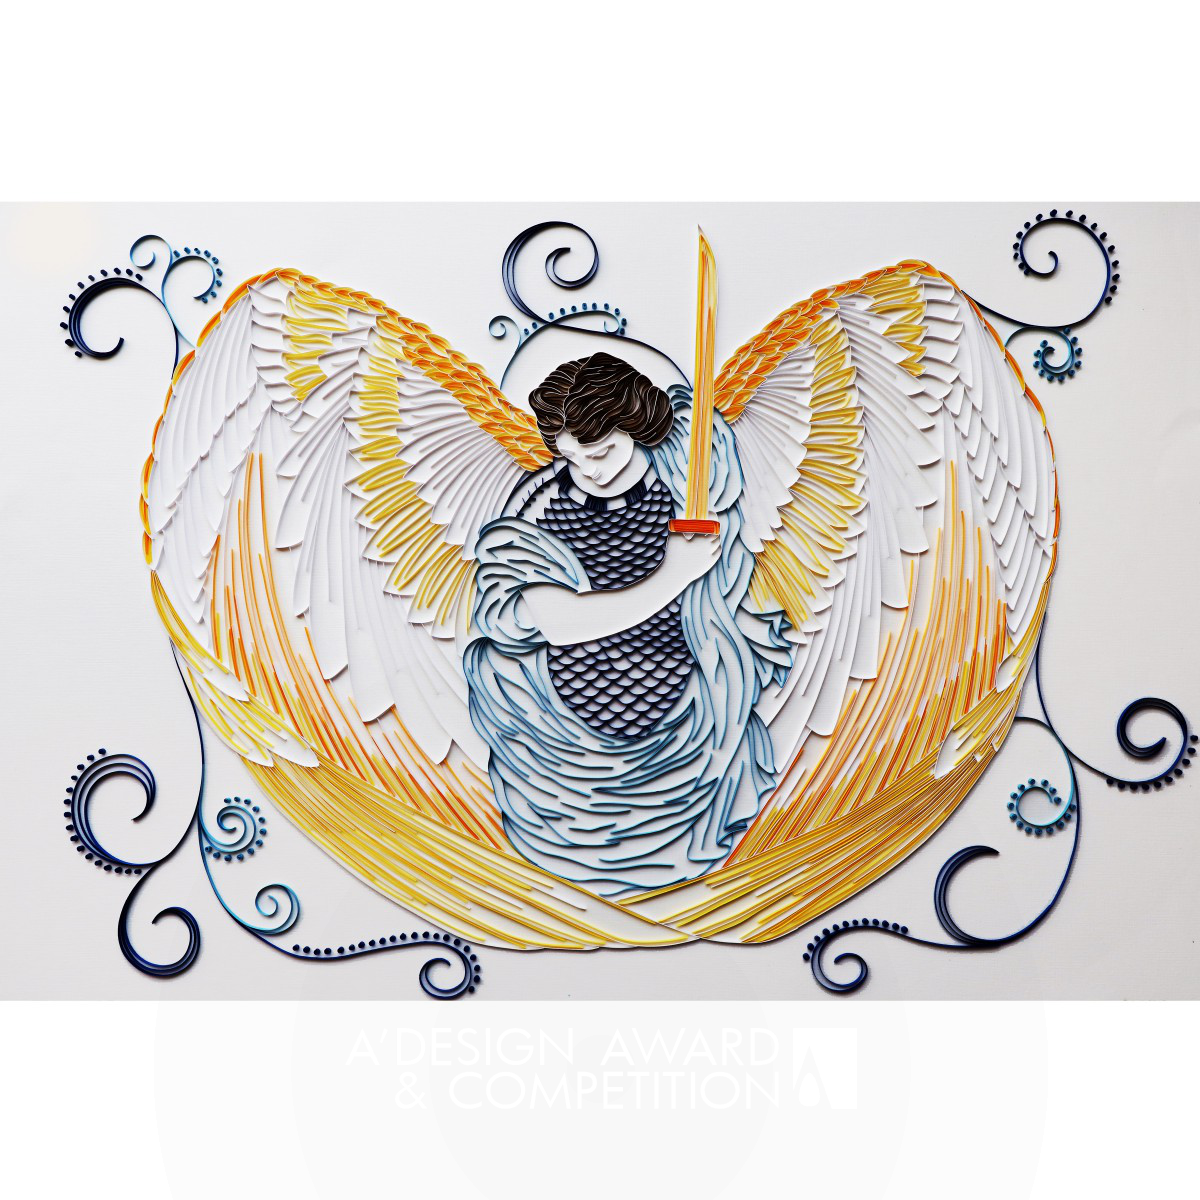 Archangel Michael Quilling by Niamh Faherty